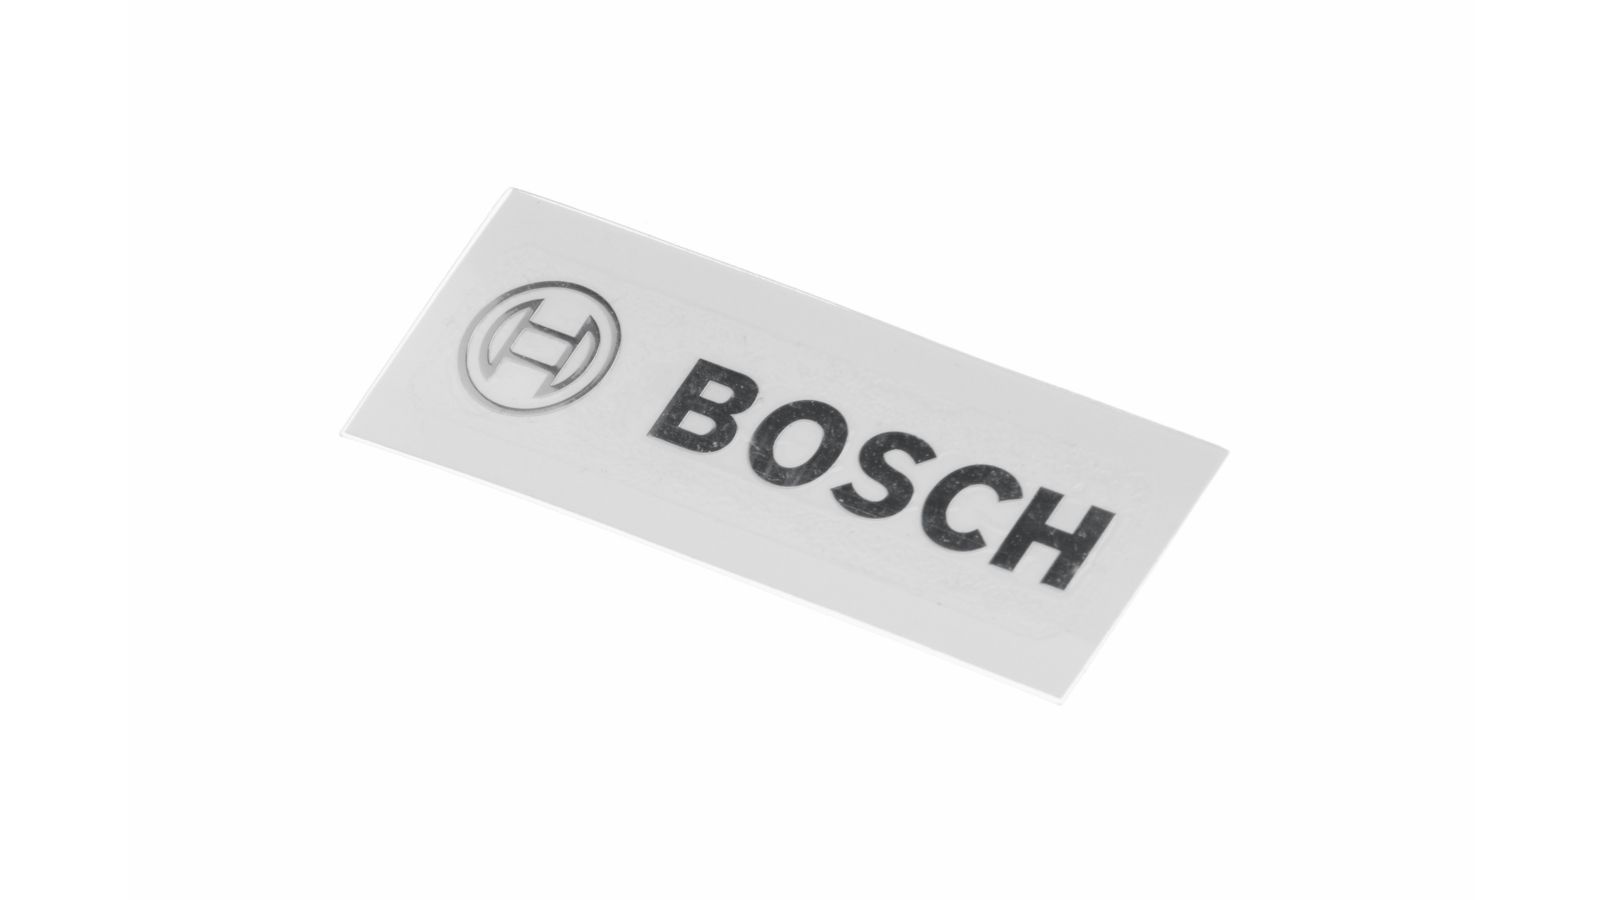 Logo, Plate With Bosch Logo For Fridges, Freezers and Dishwashers - 00614976 BSH - Bosch / Siemens